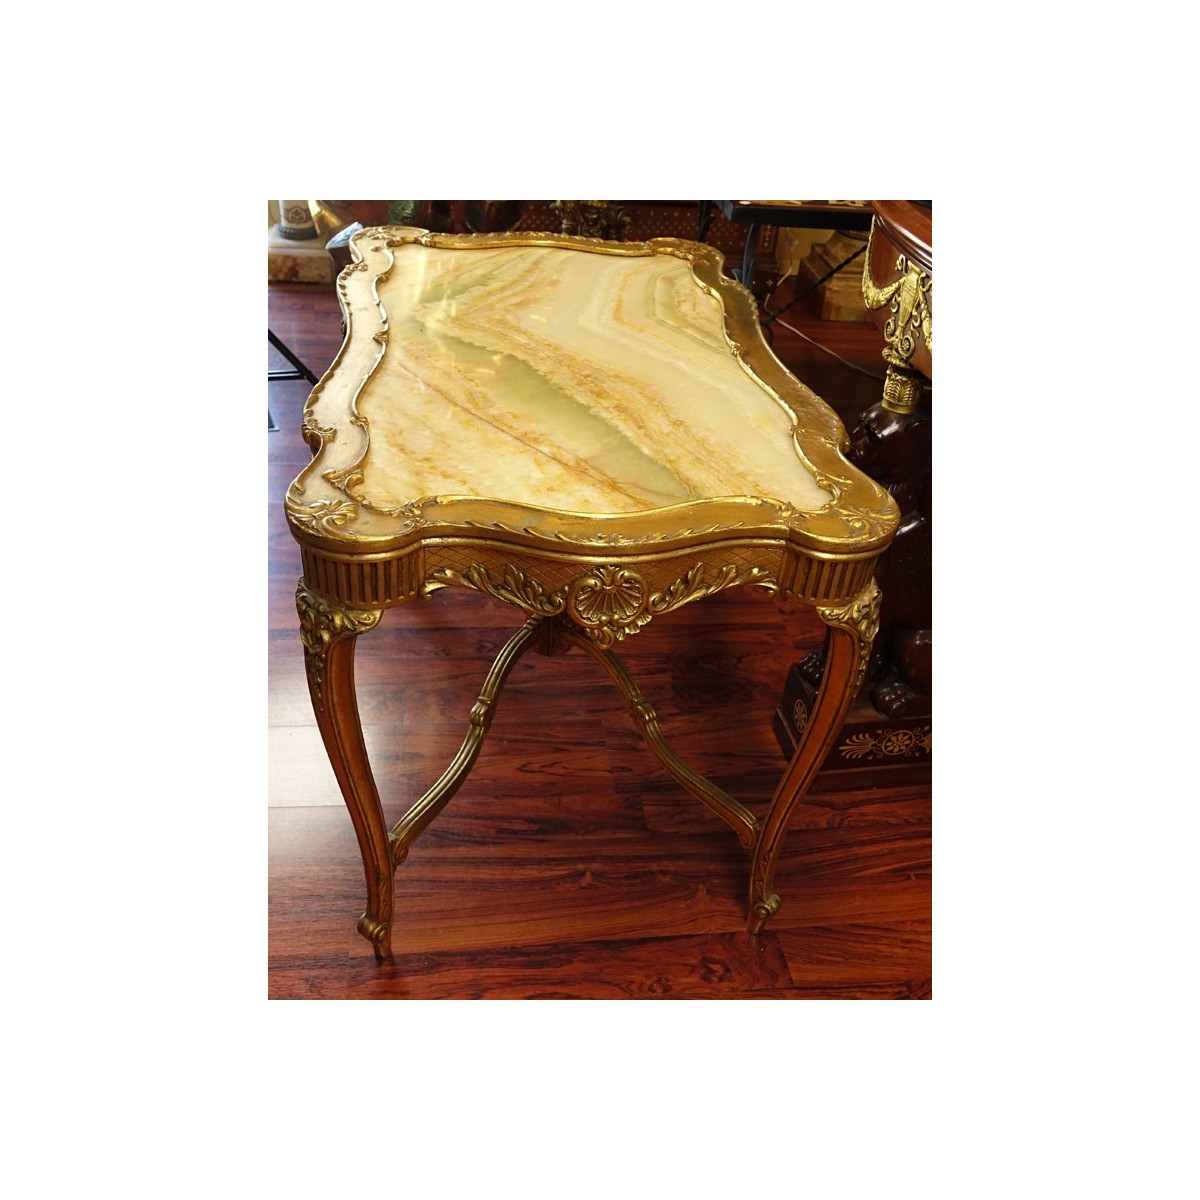 Early 20th Century Carved and Gilt Wood Center Table with Onyx Top. Decorated with carved scroll mo